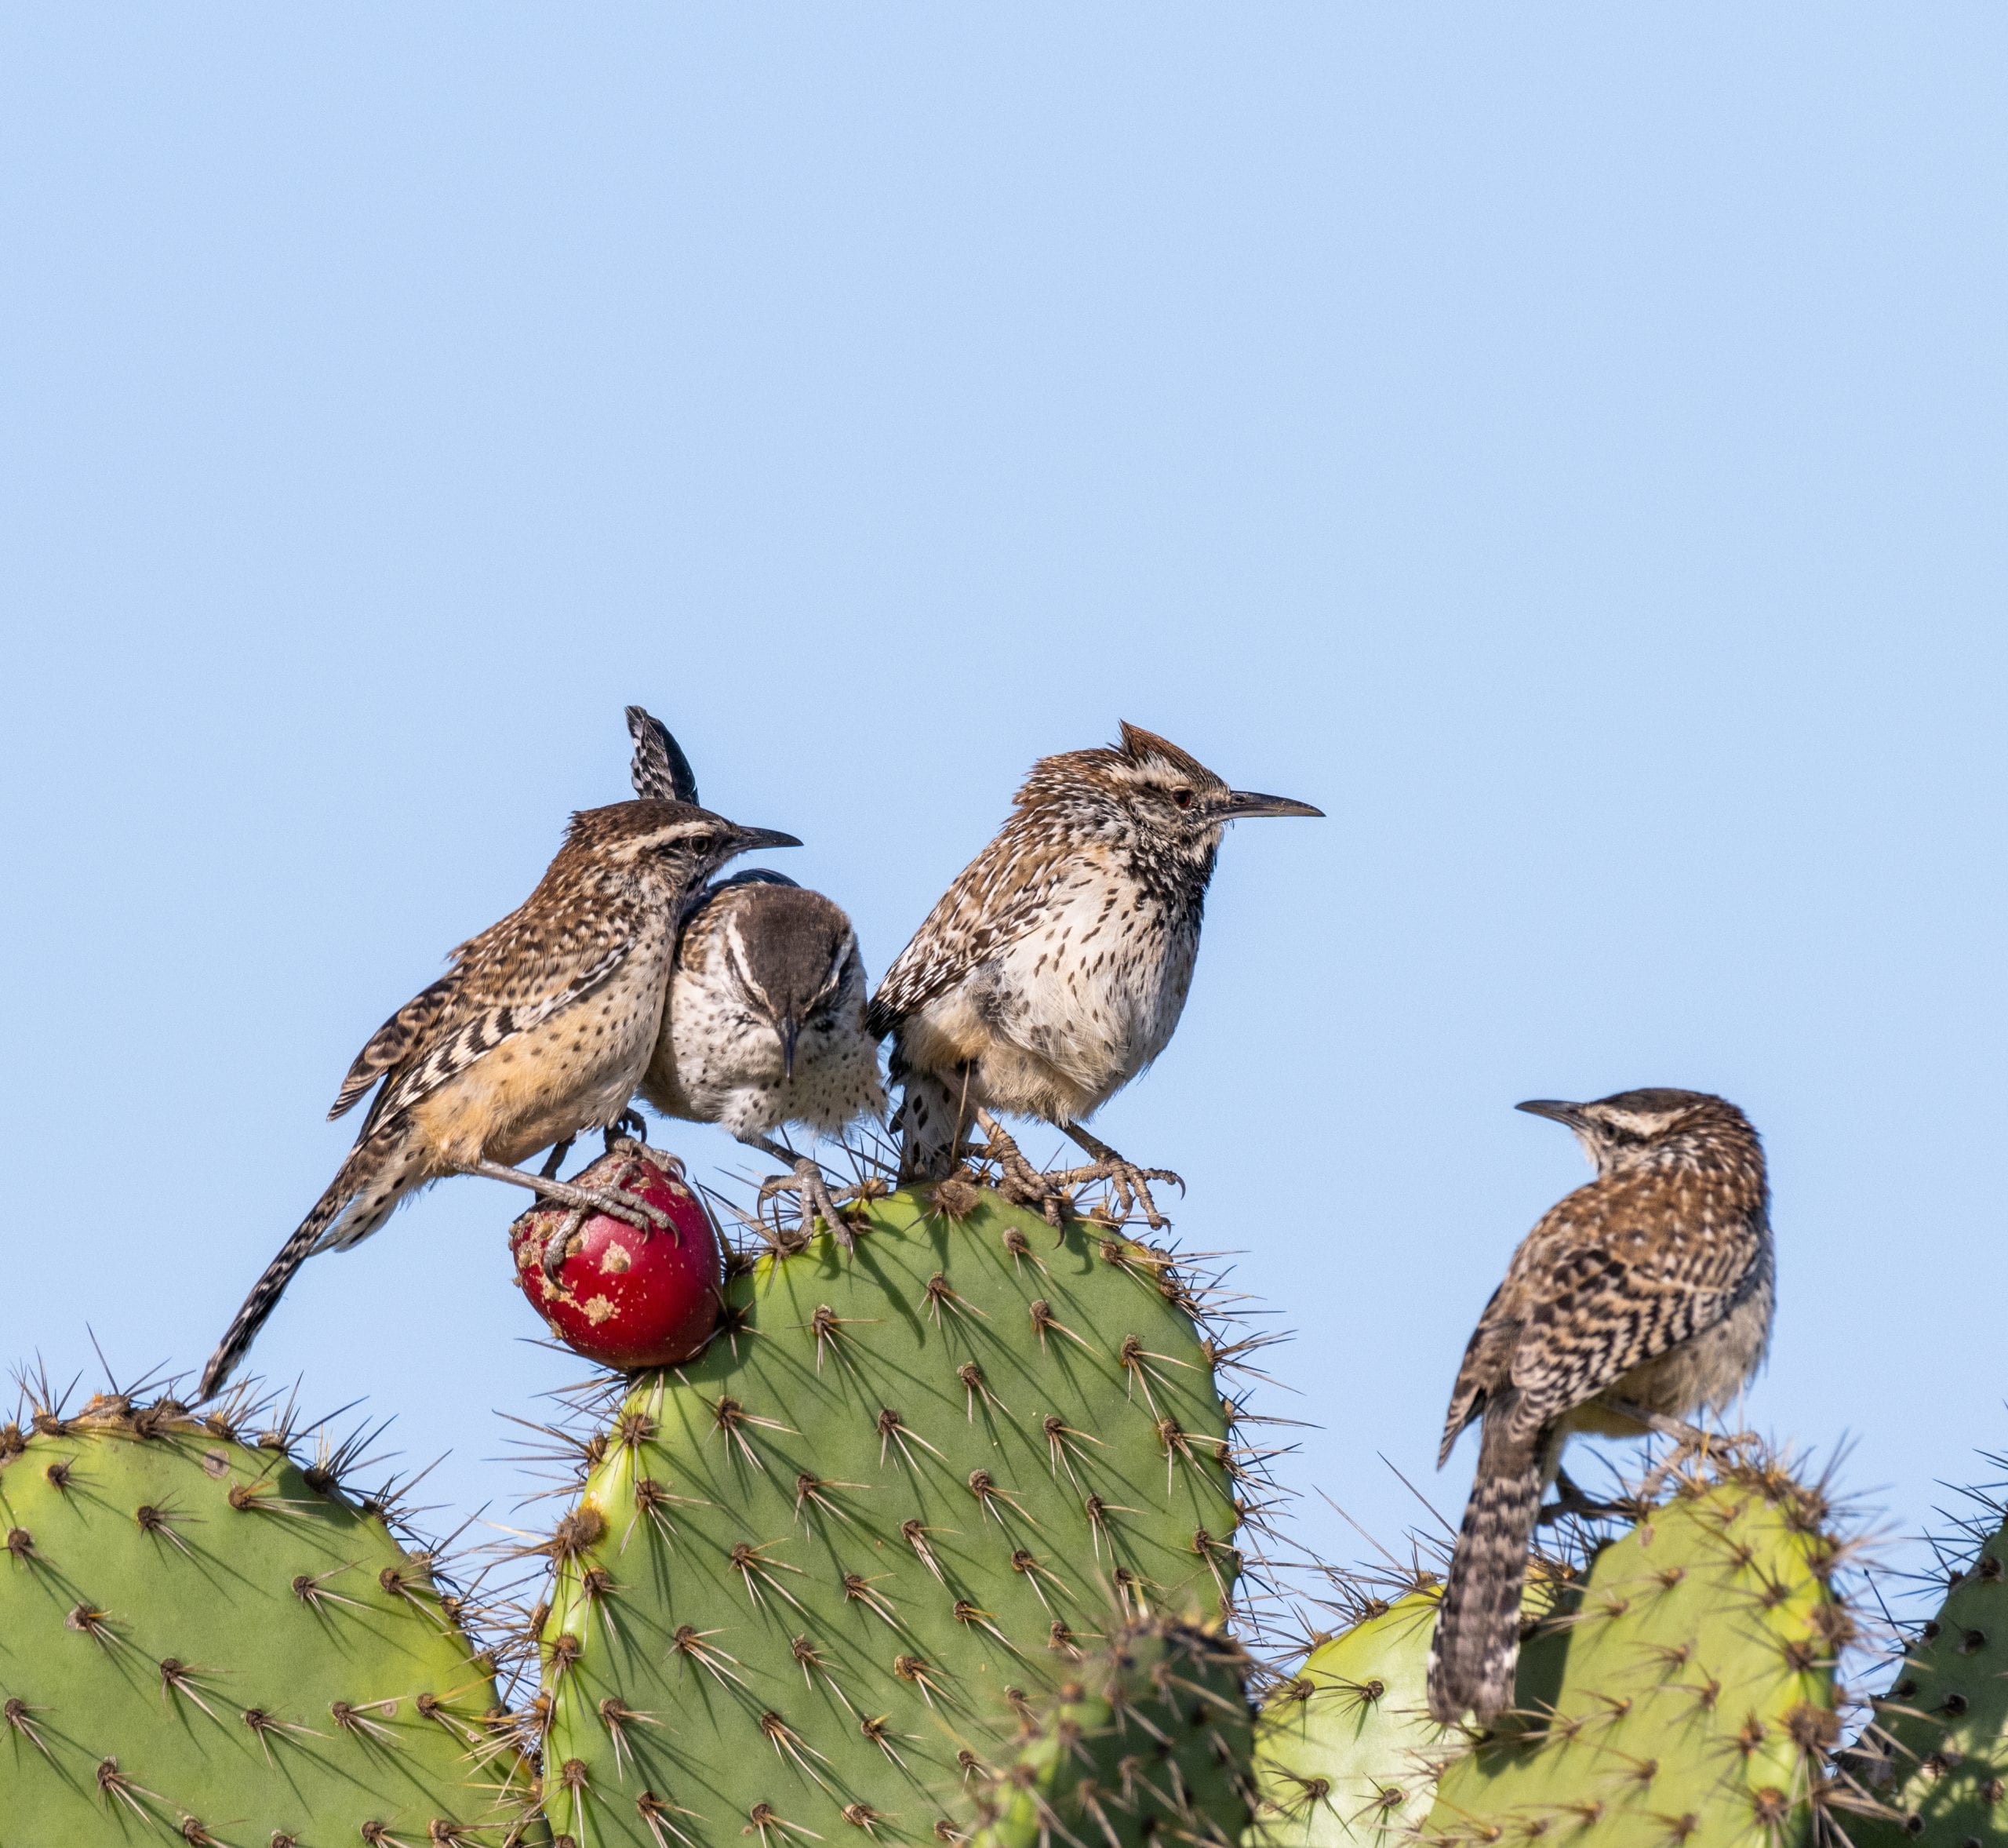 Coastal cactus wrens jockey for position on one of the preserve’s prickly pear cactuses.